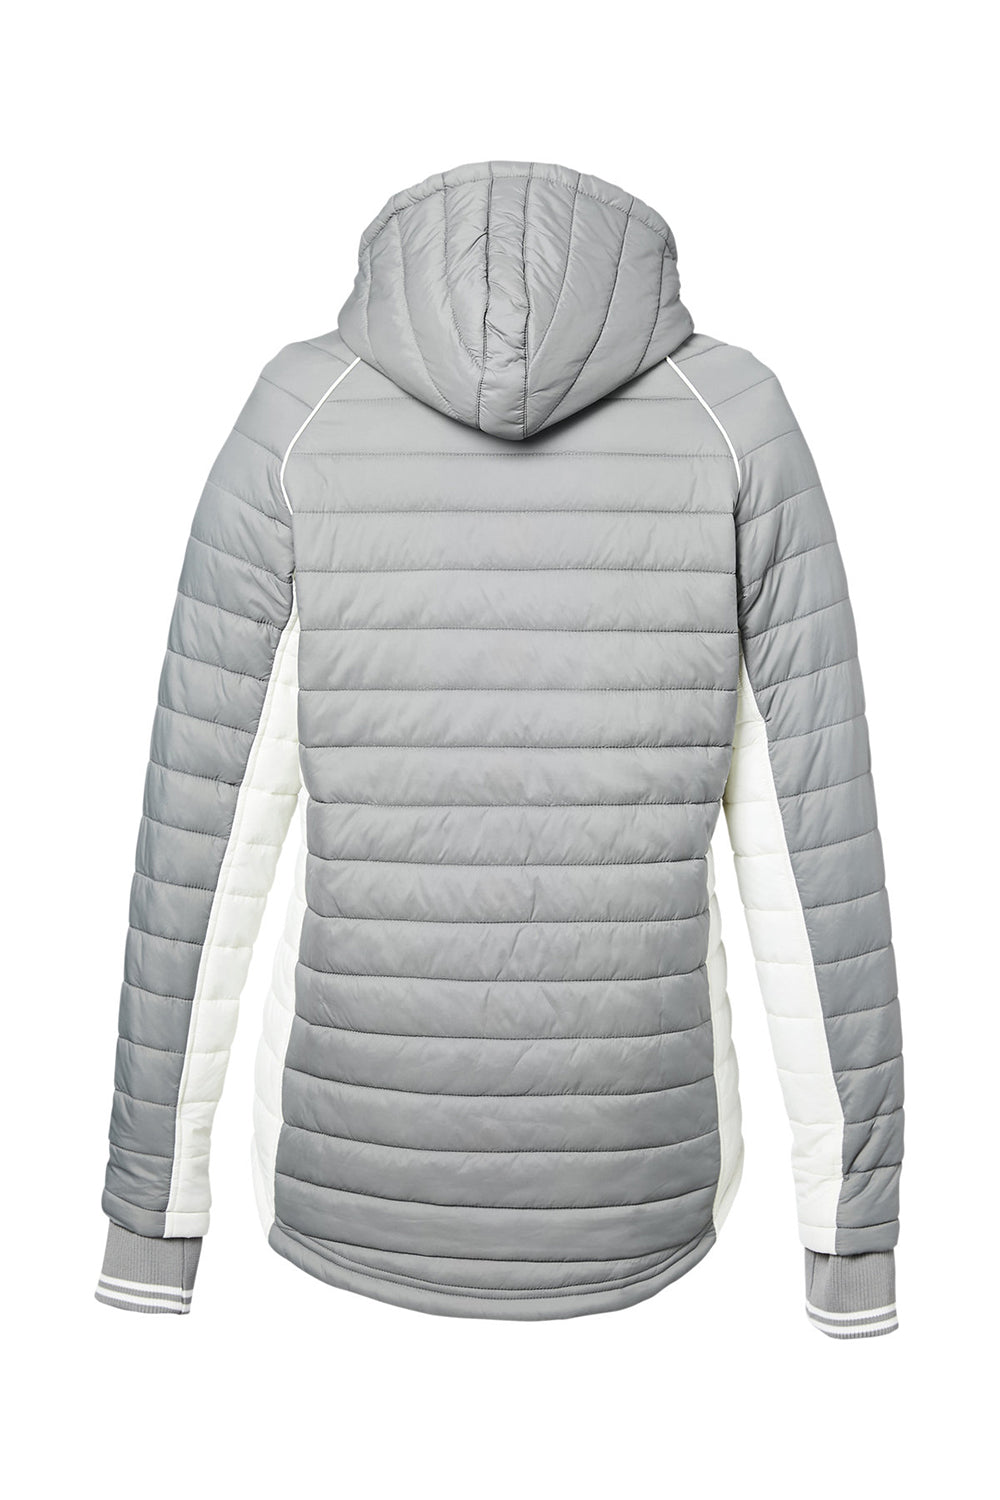 Nautica N17187 Womens Nautical Mile Packable Full Zip Hooded Puffer Jacket Graphite Grey/Antique White Flat Back